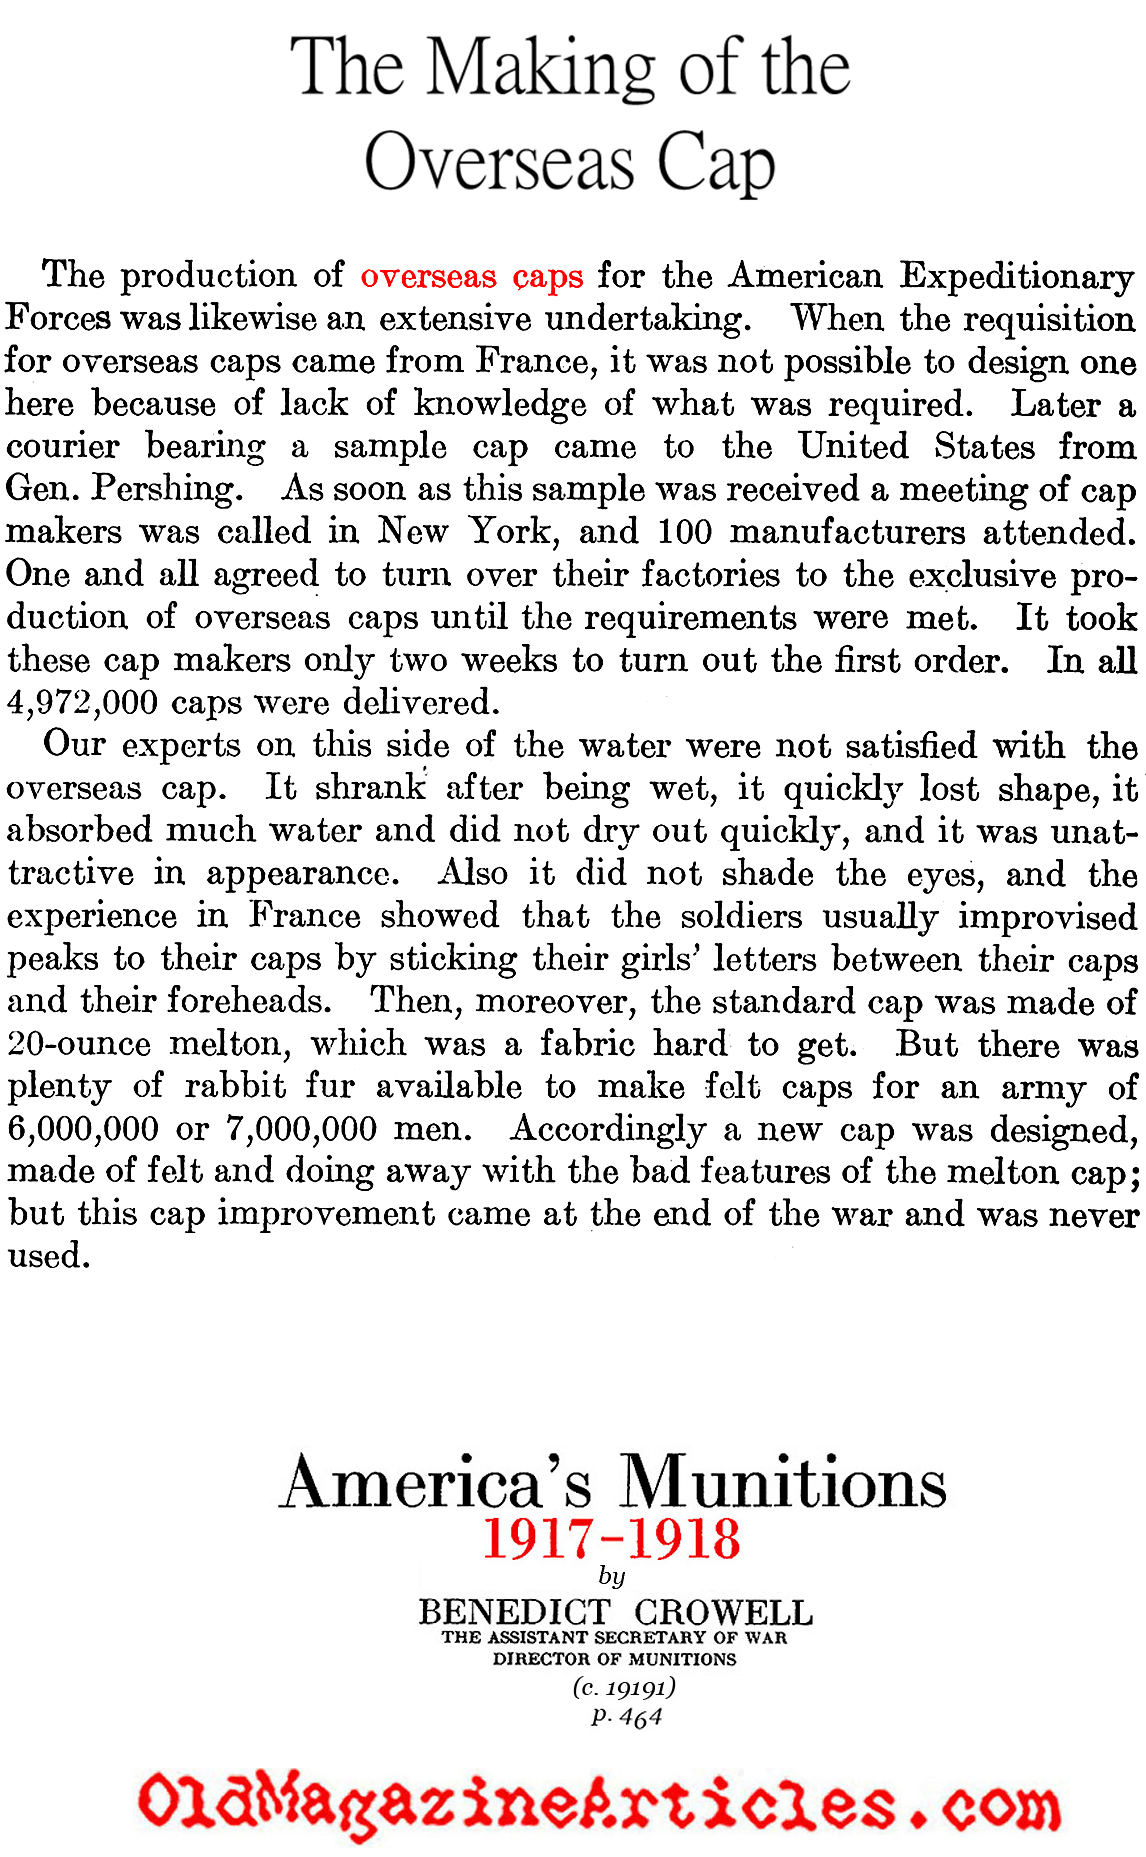 Manufacturing the Overseas Cap (America's Munitions, 1919)